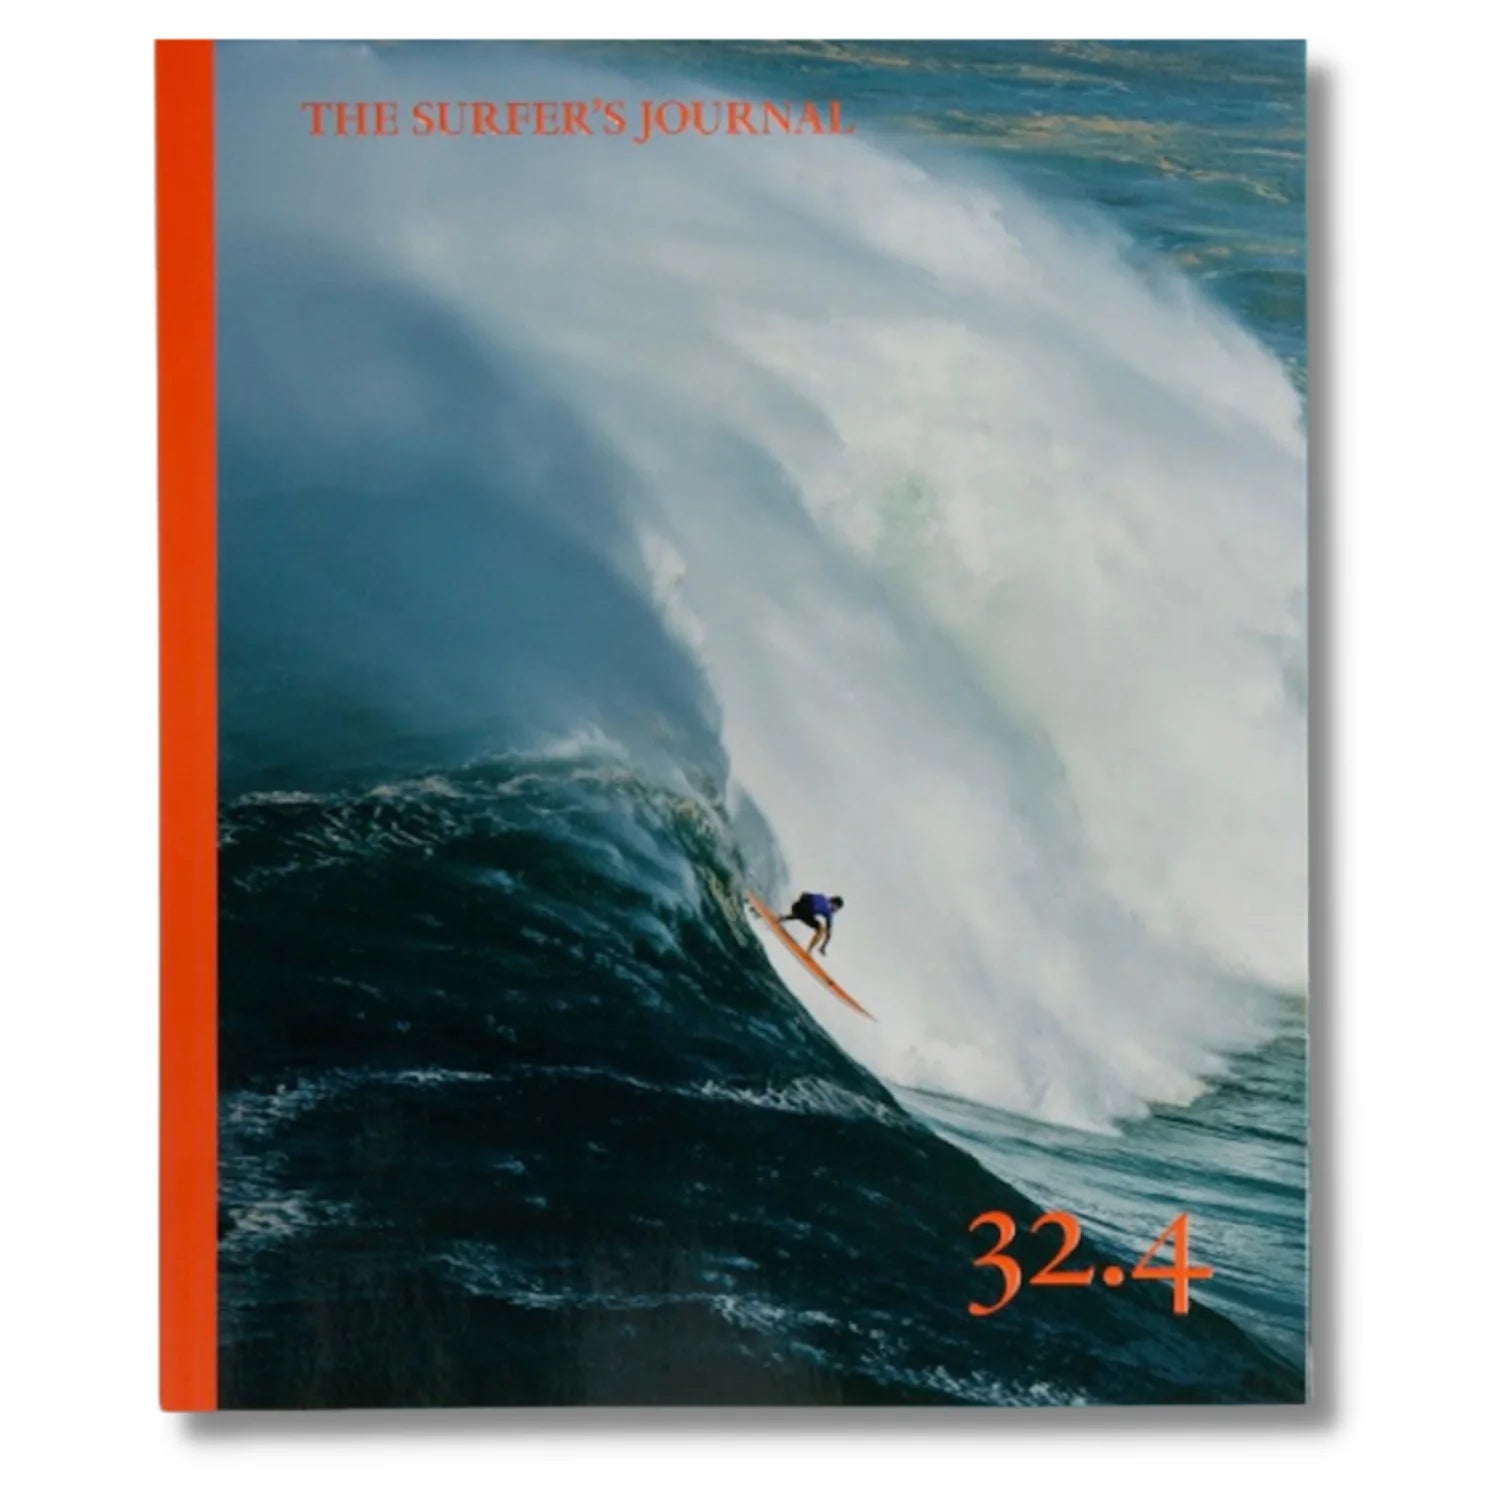 The Surfer´s Journal 32.4